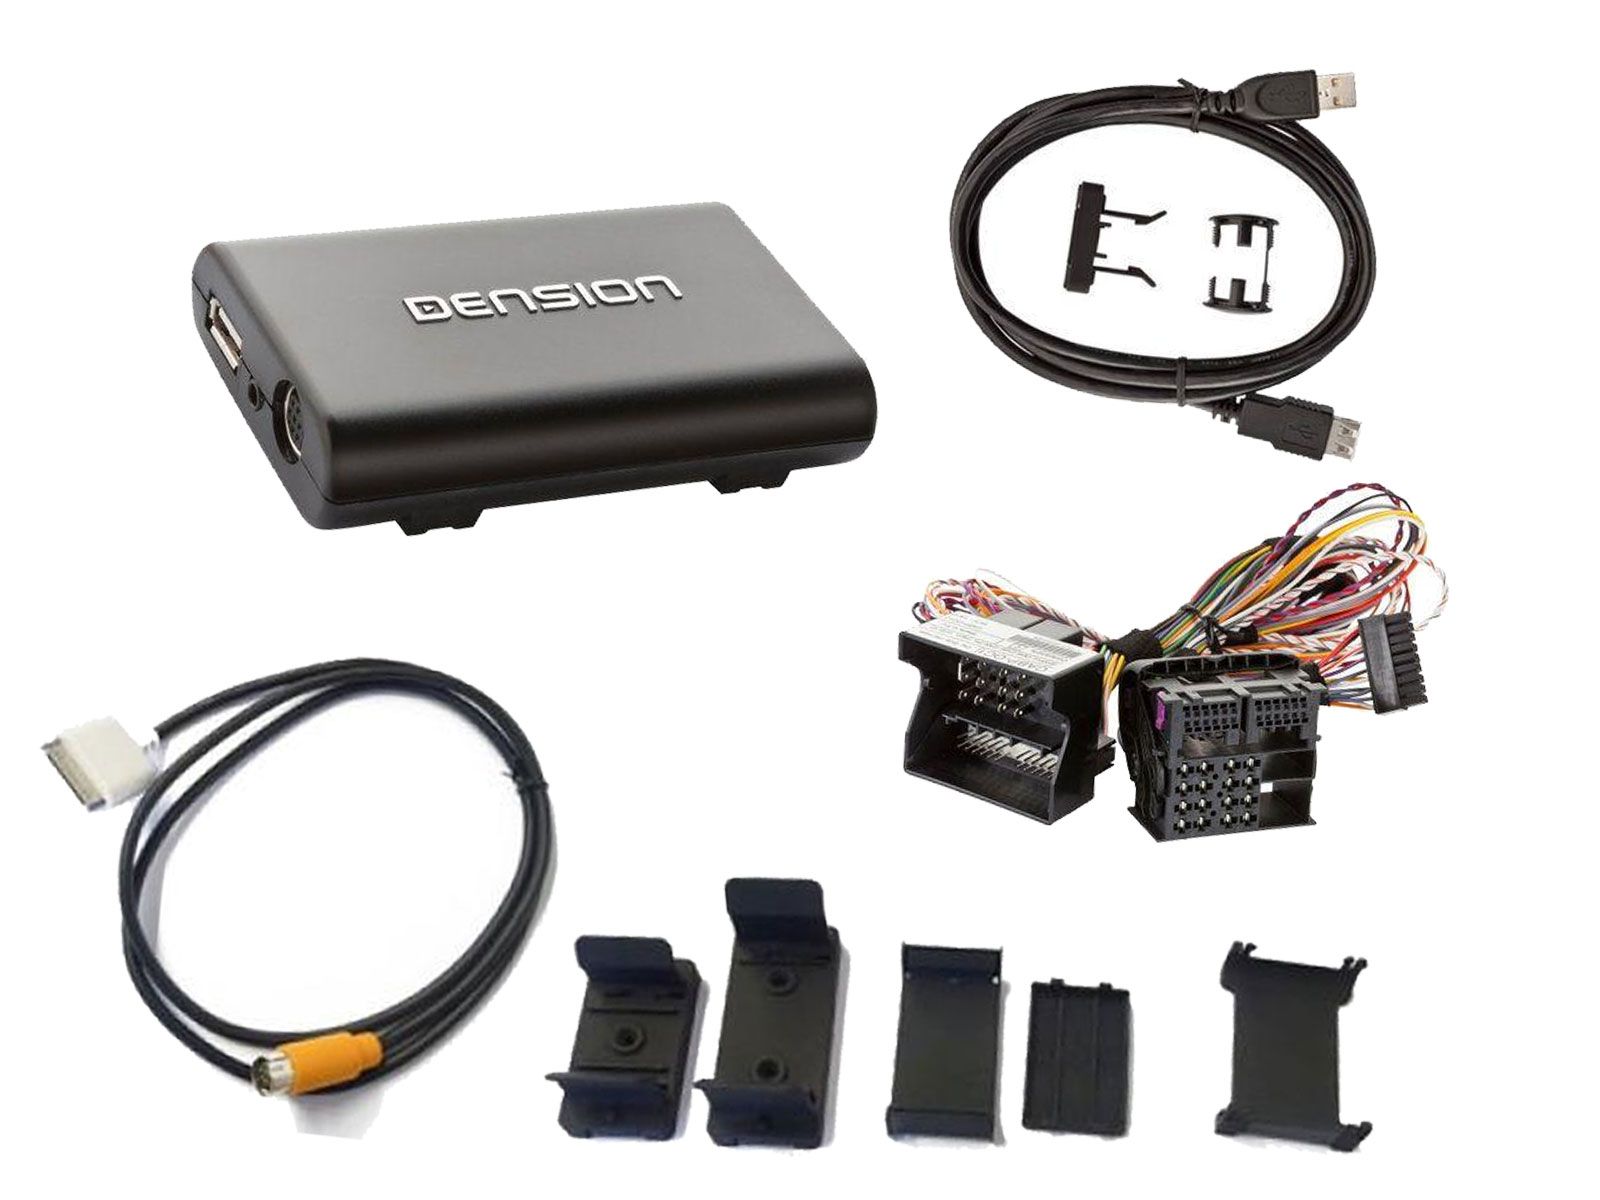 Dension Gateway 300 + Dock Cable - iPod / iPhone / USB / AUX Interface - Opel (Quadlock) - CD30